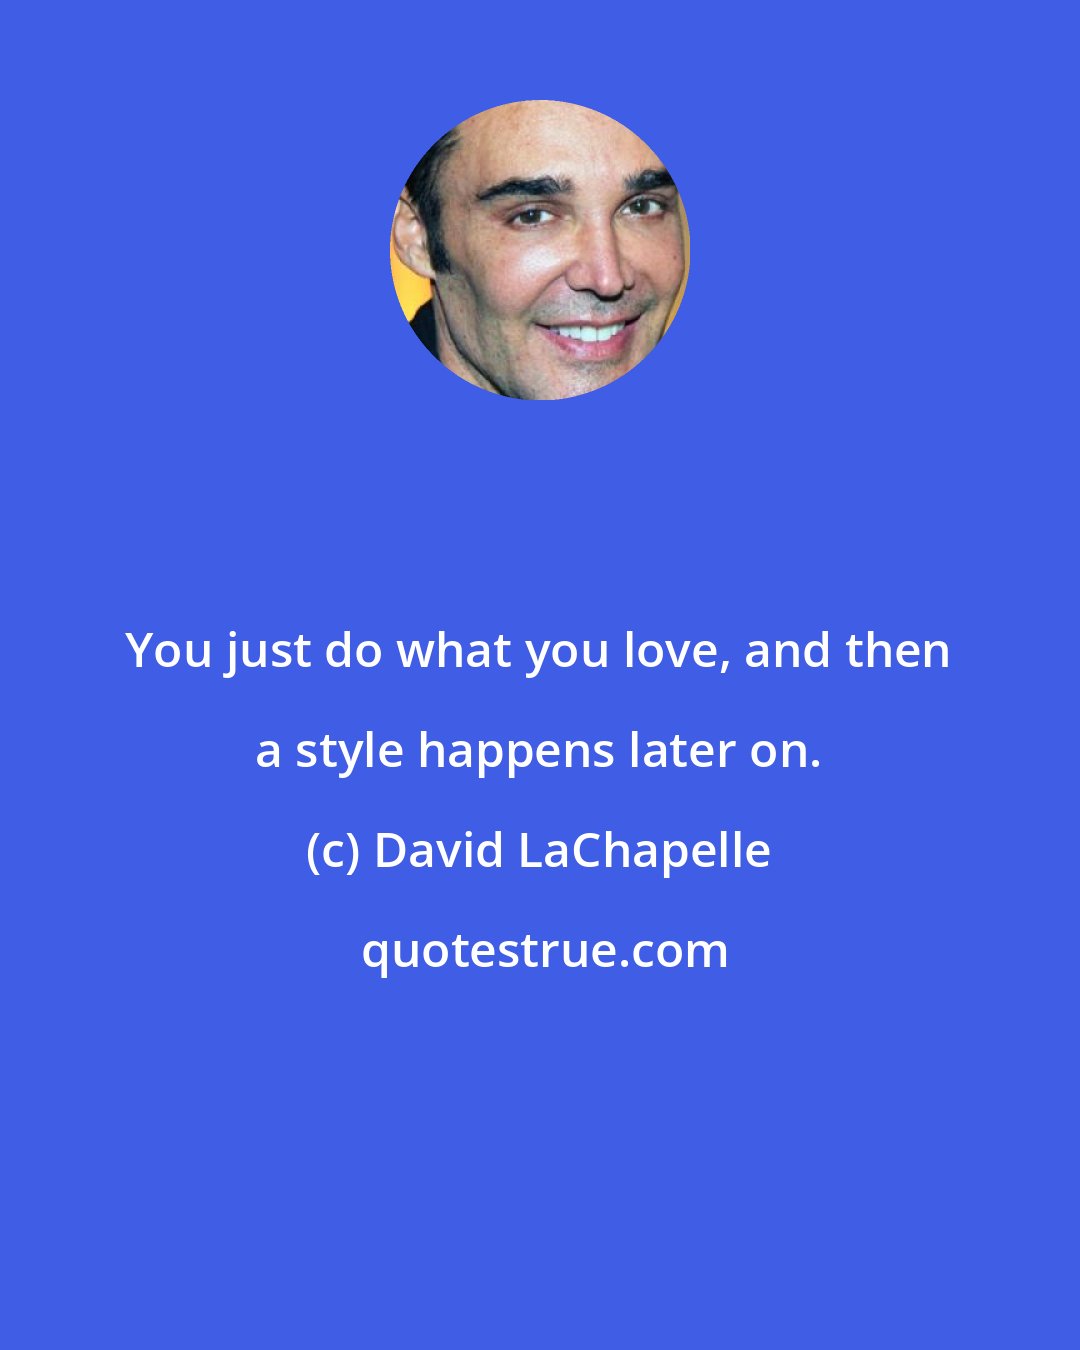 David LaChapelle: You just do what you love, and then a style happens later on.